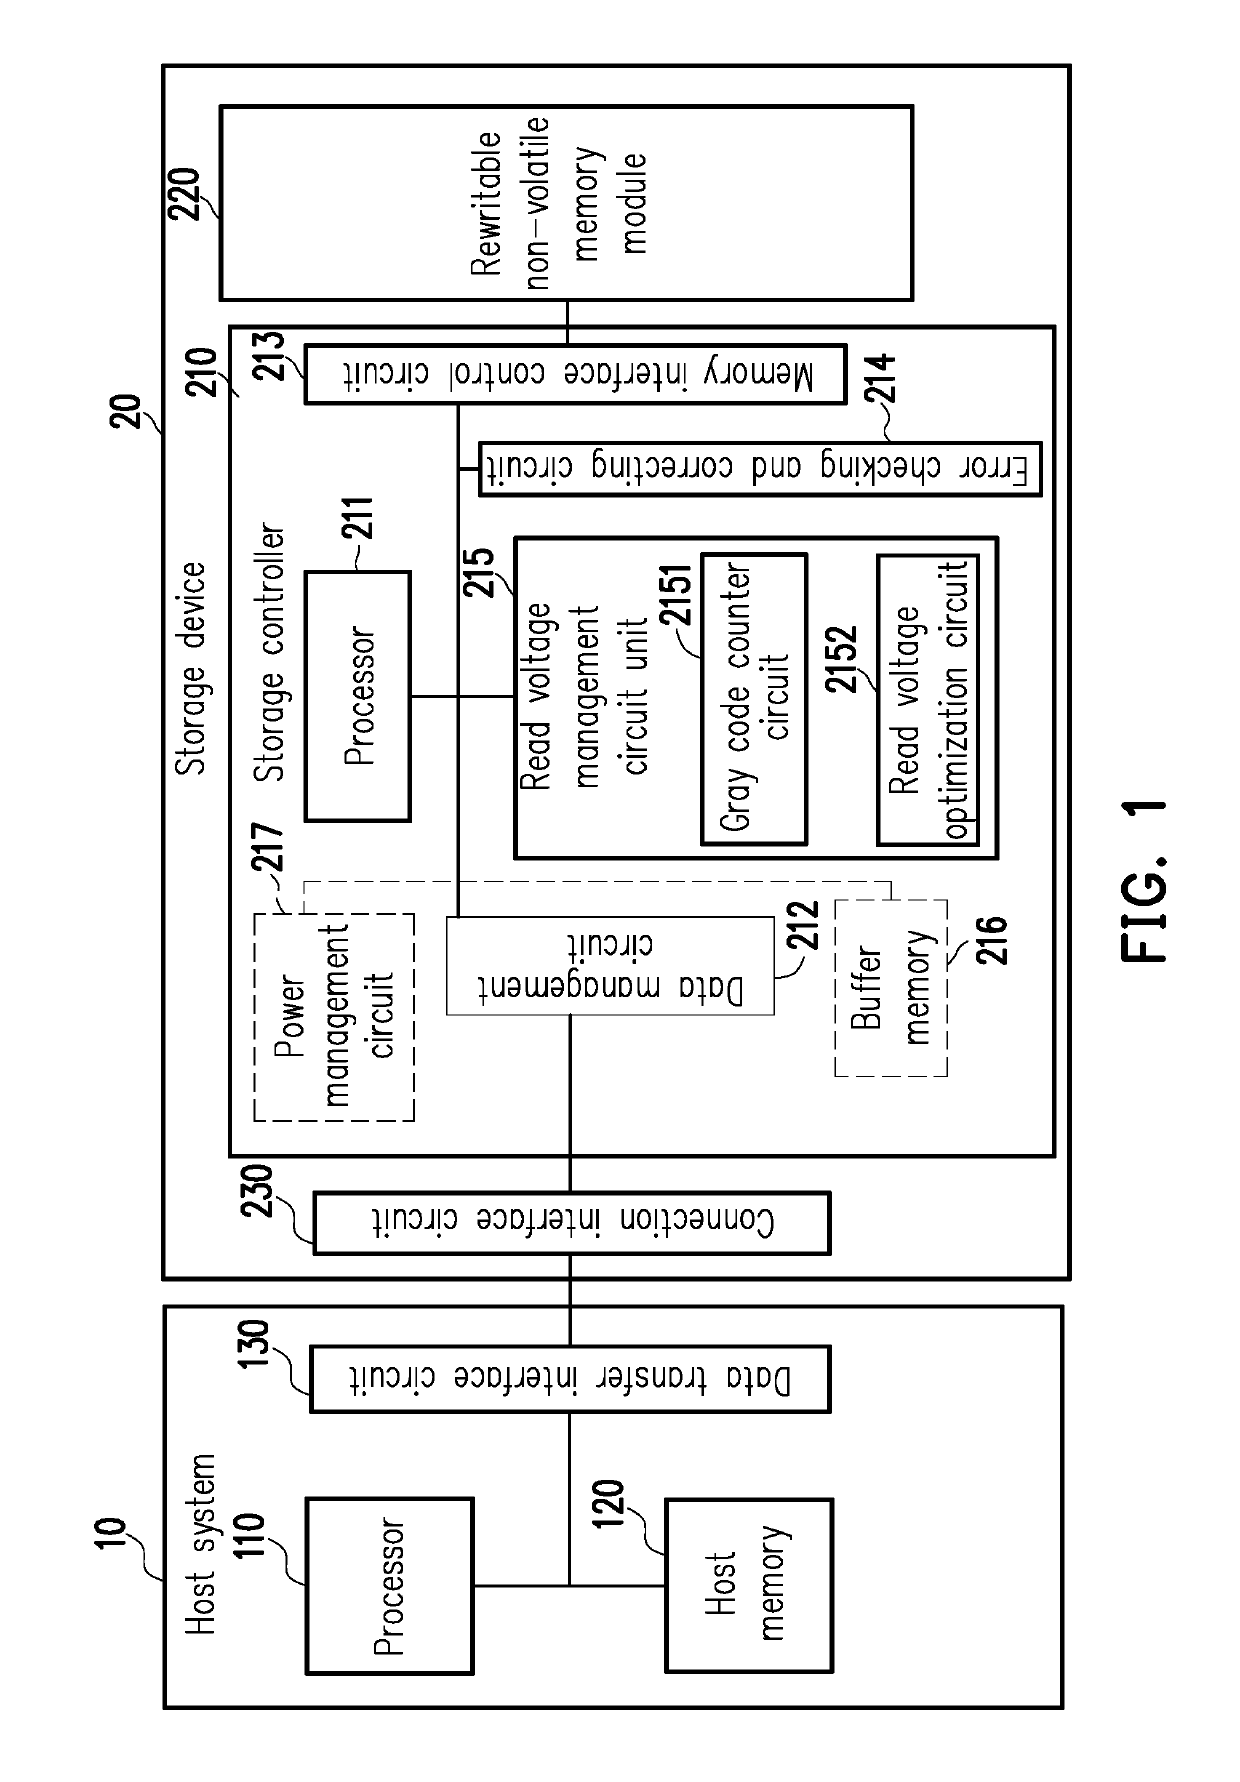 Decoding method and storage controller